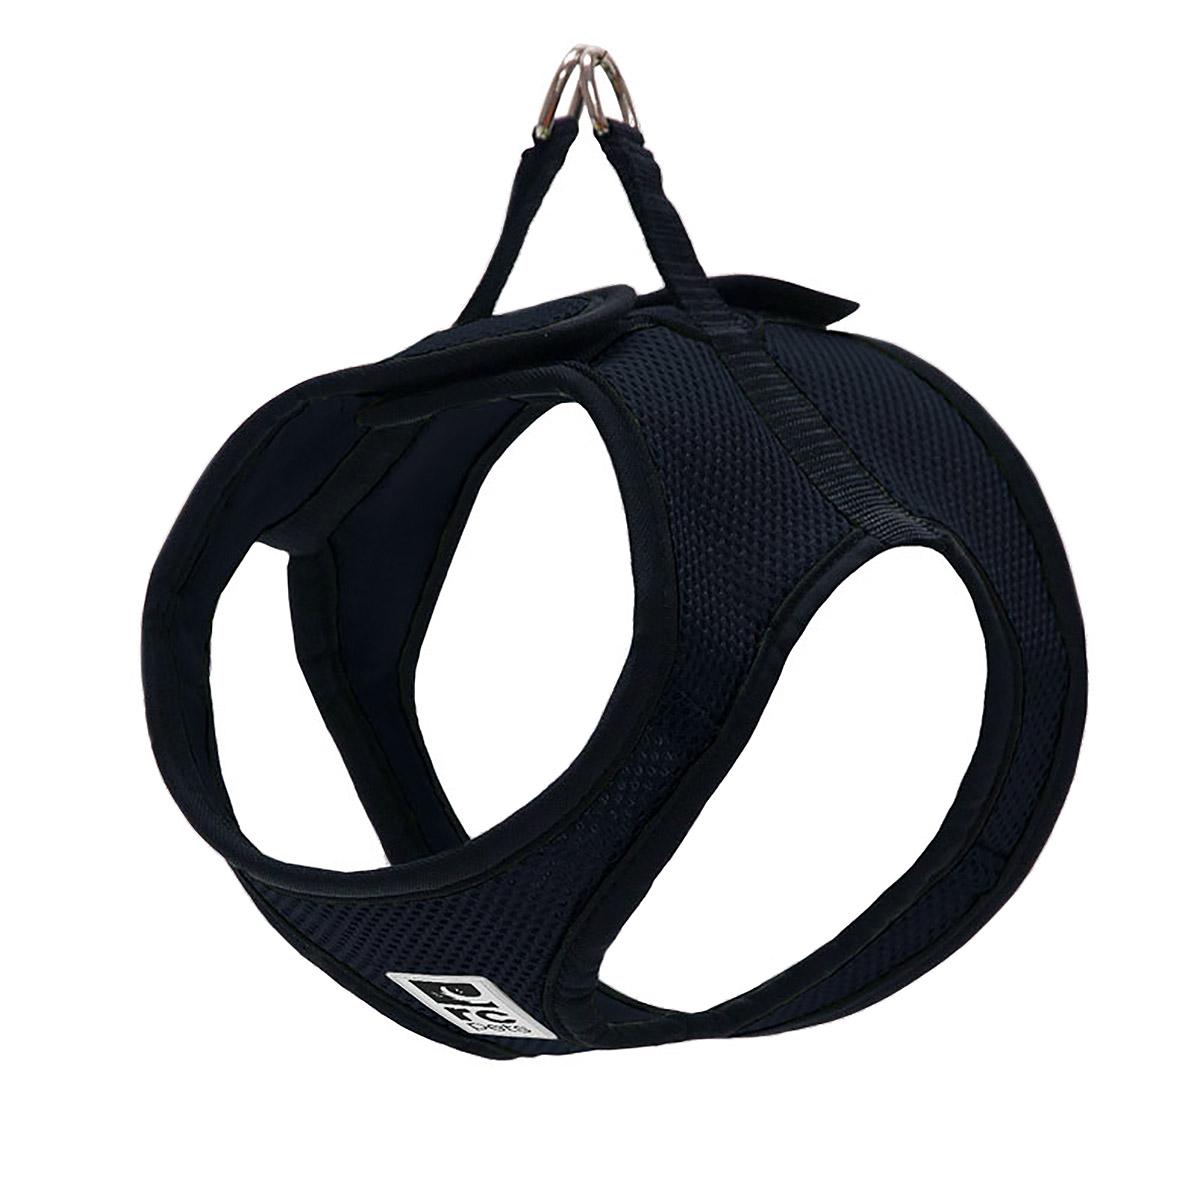 Step-in Cirque Dog Harness - Black